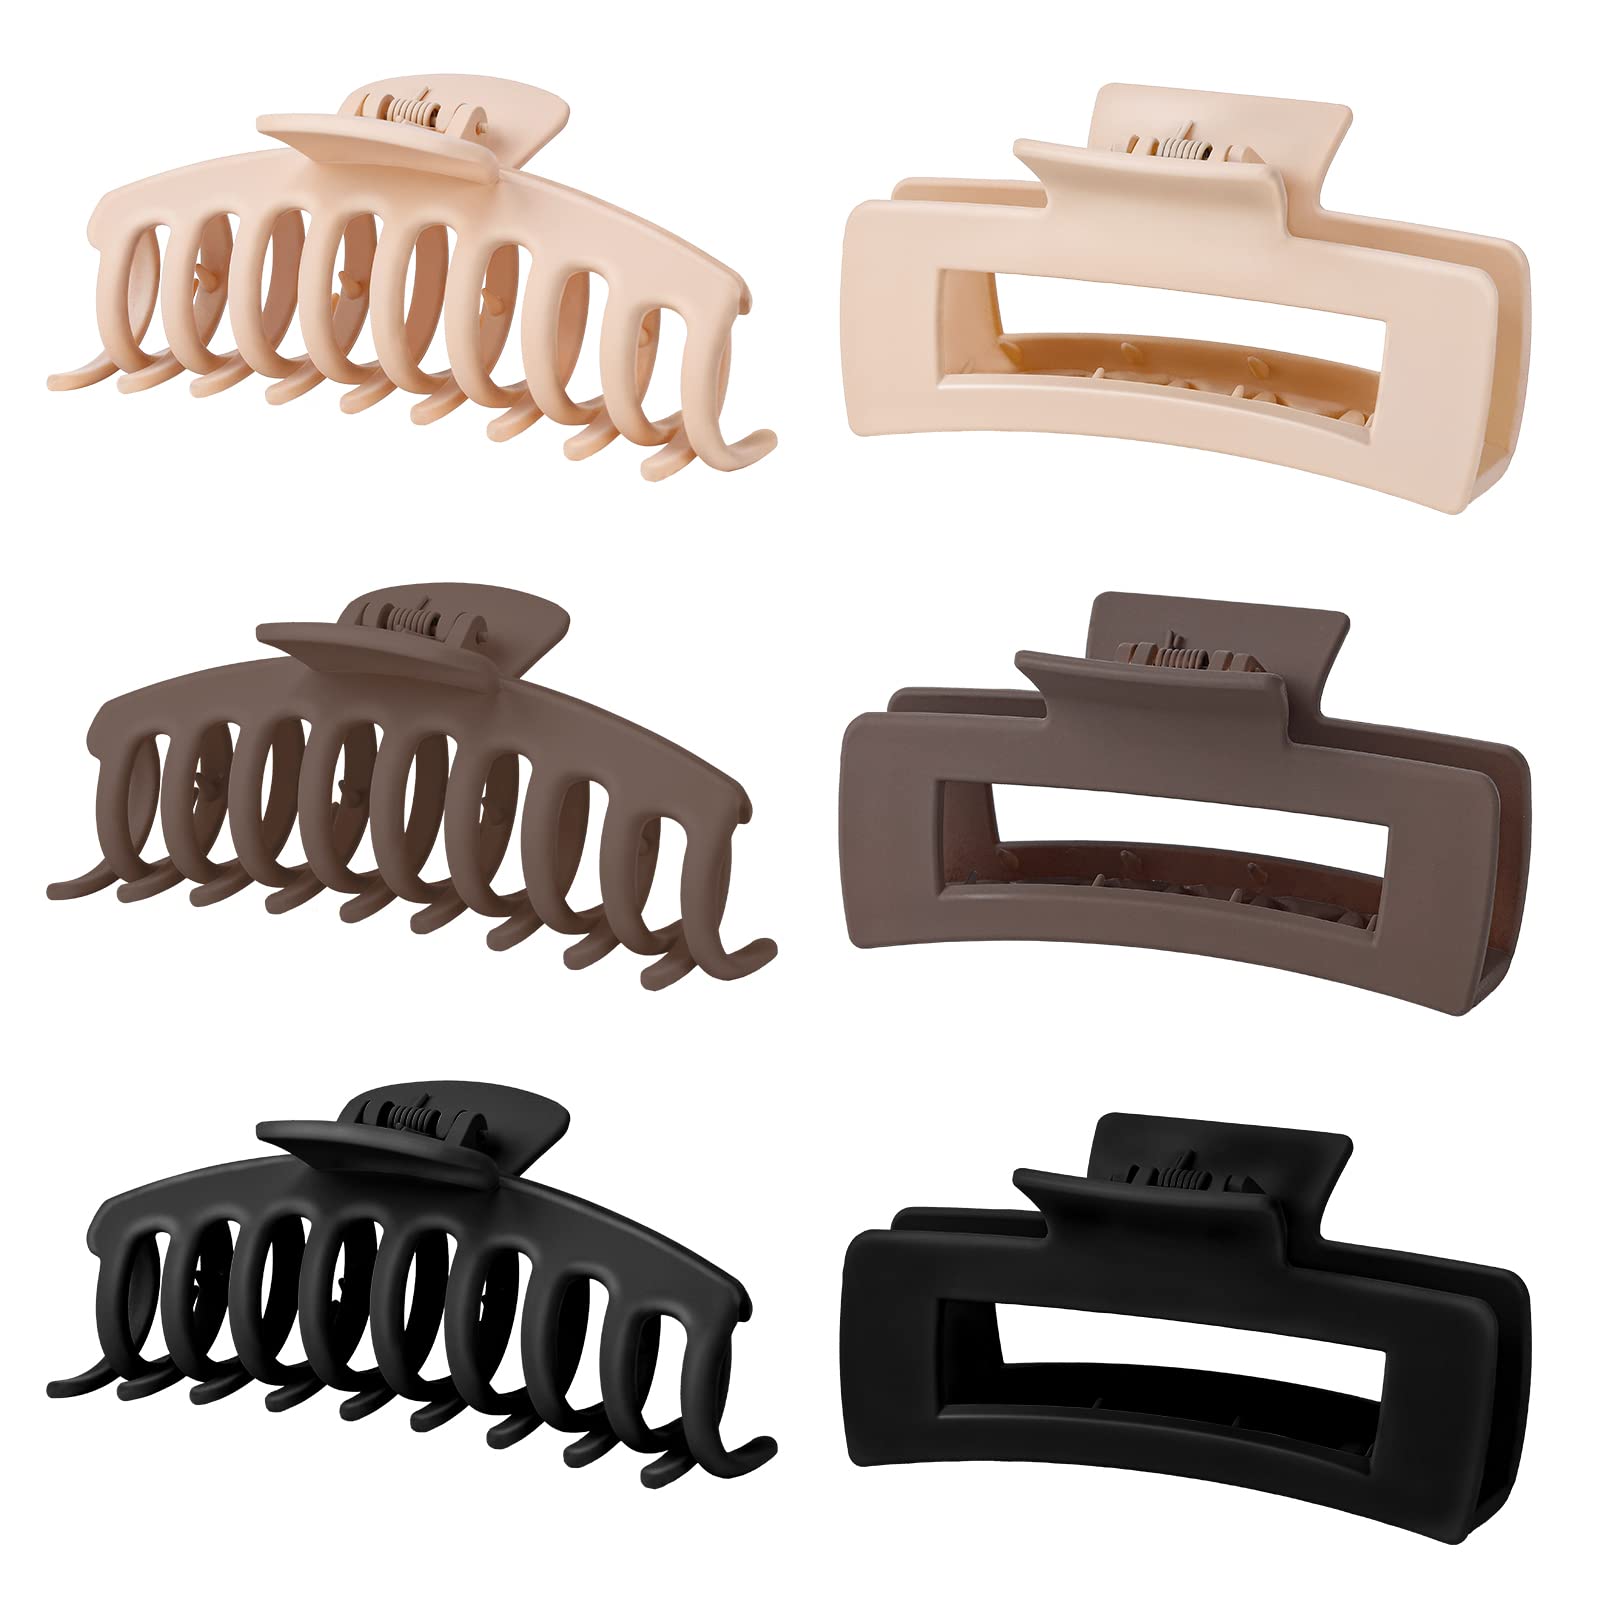 Big Hair Claw Clips-3 Packs Nonslip Large Claw Clip Plastic Hair